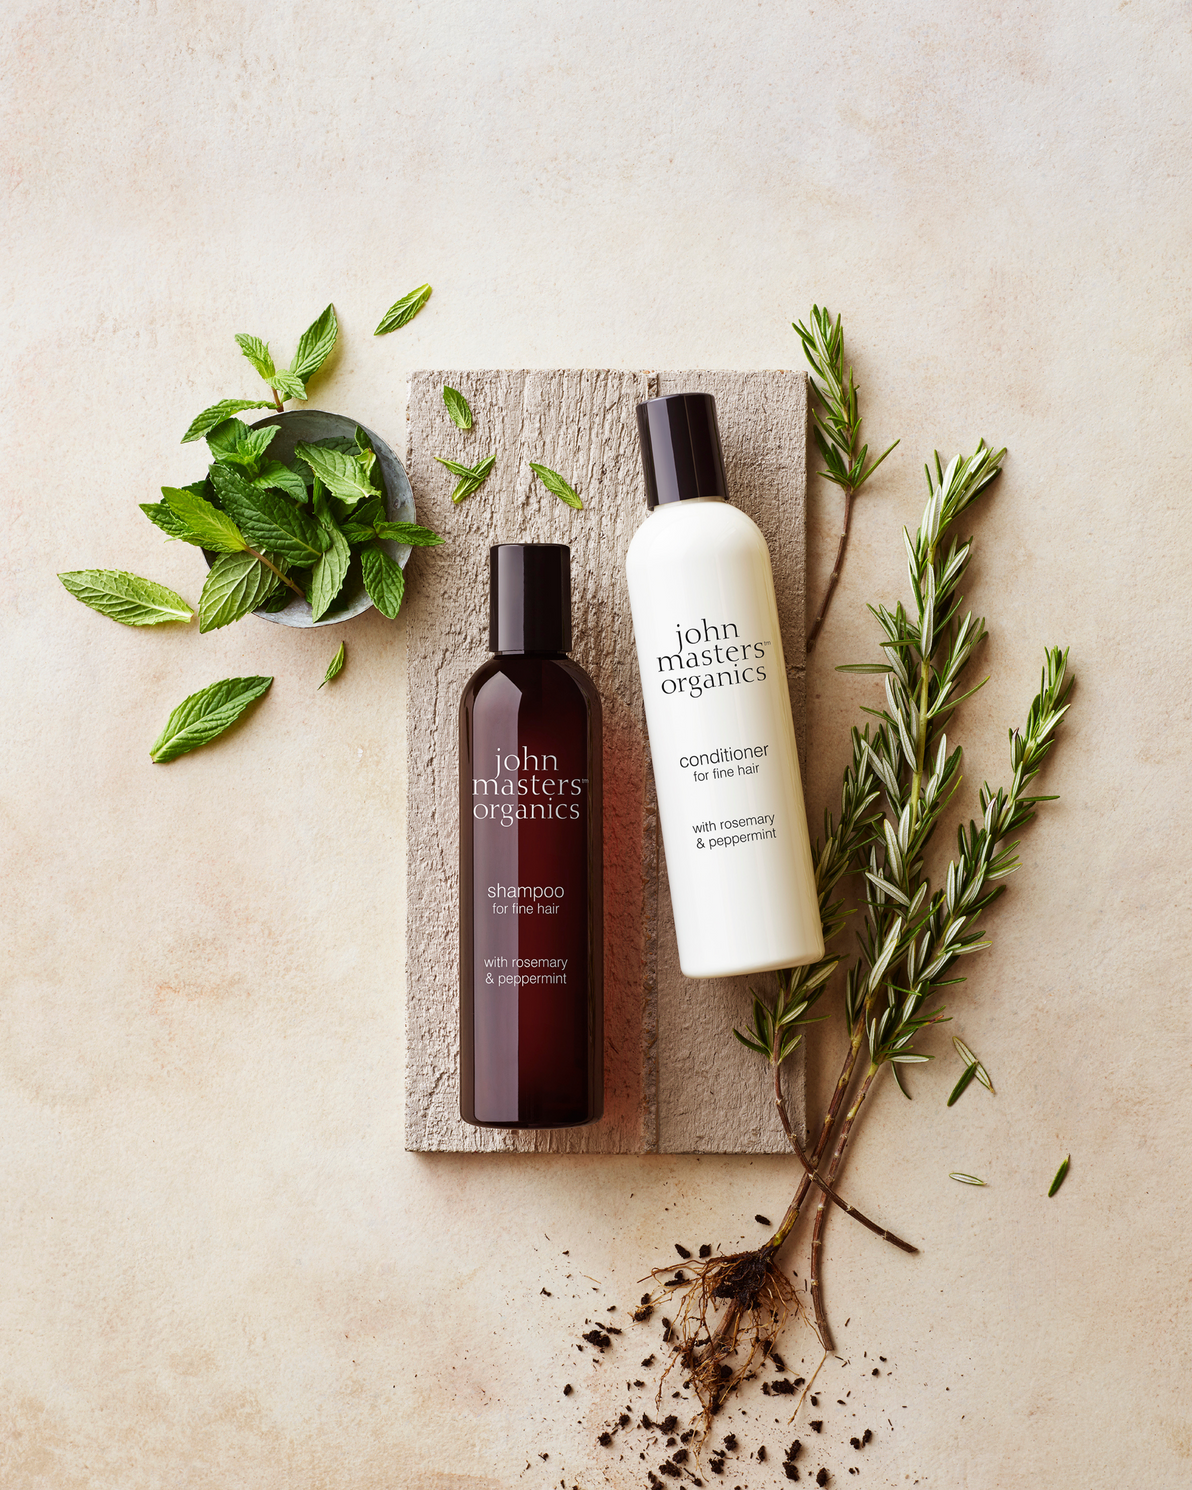 Volumizing Conditioner with Rosemary & Peppermint